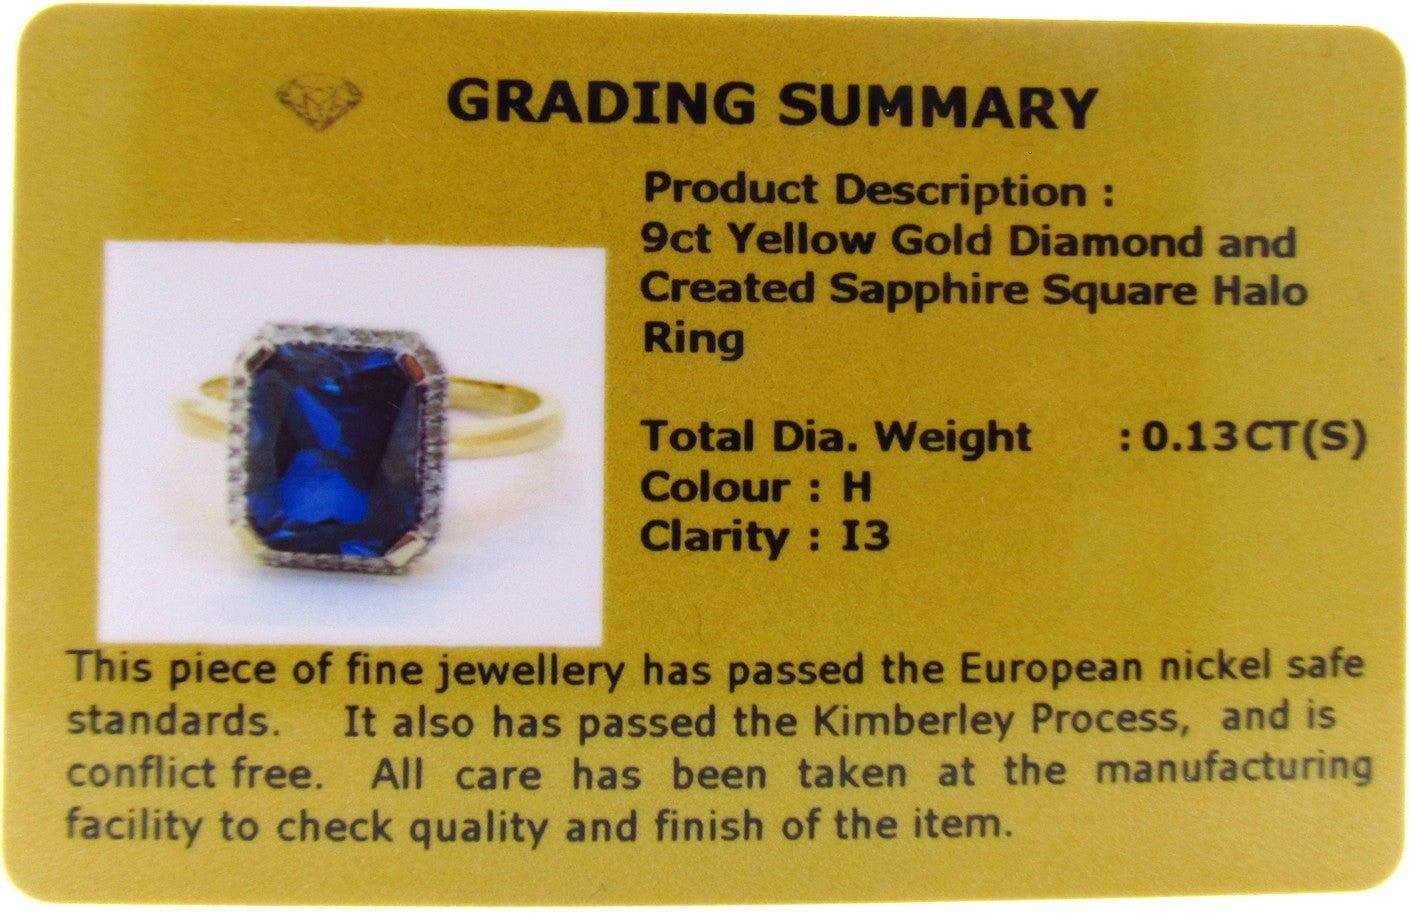 9ct Yellow Gold Diamond & Synthetic Sapphire Square Halo Ring